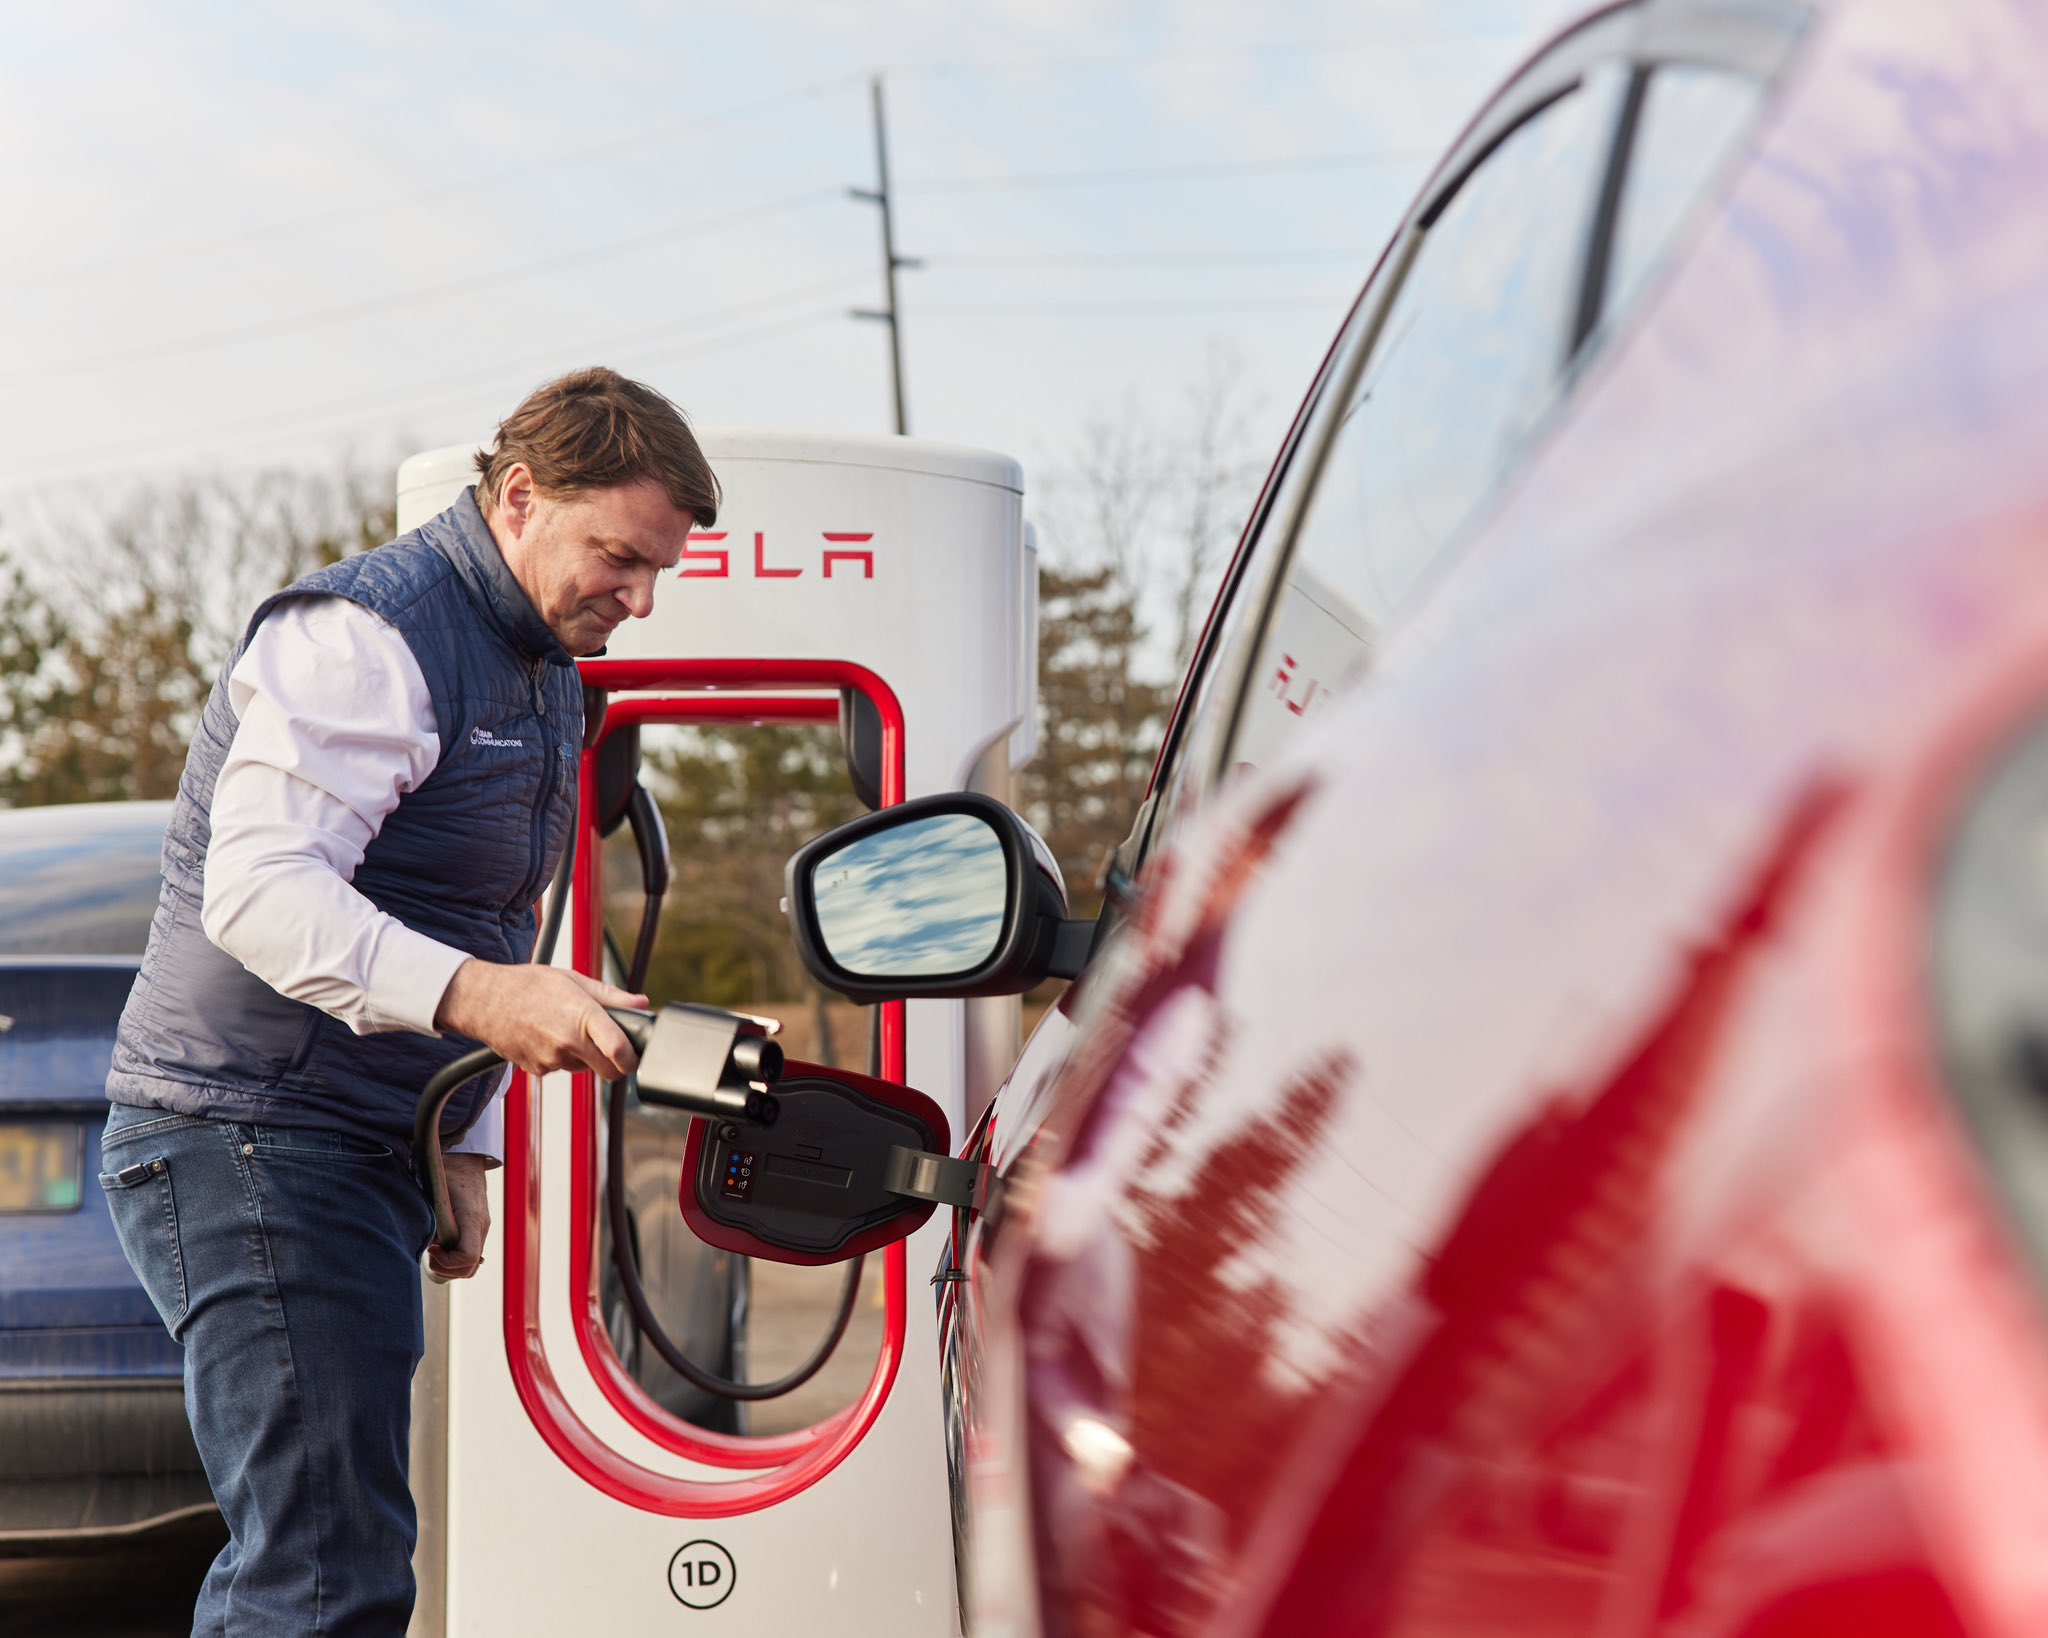 Tesla Supercharger uncertainty won’t steer NACS adoptees away